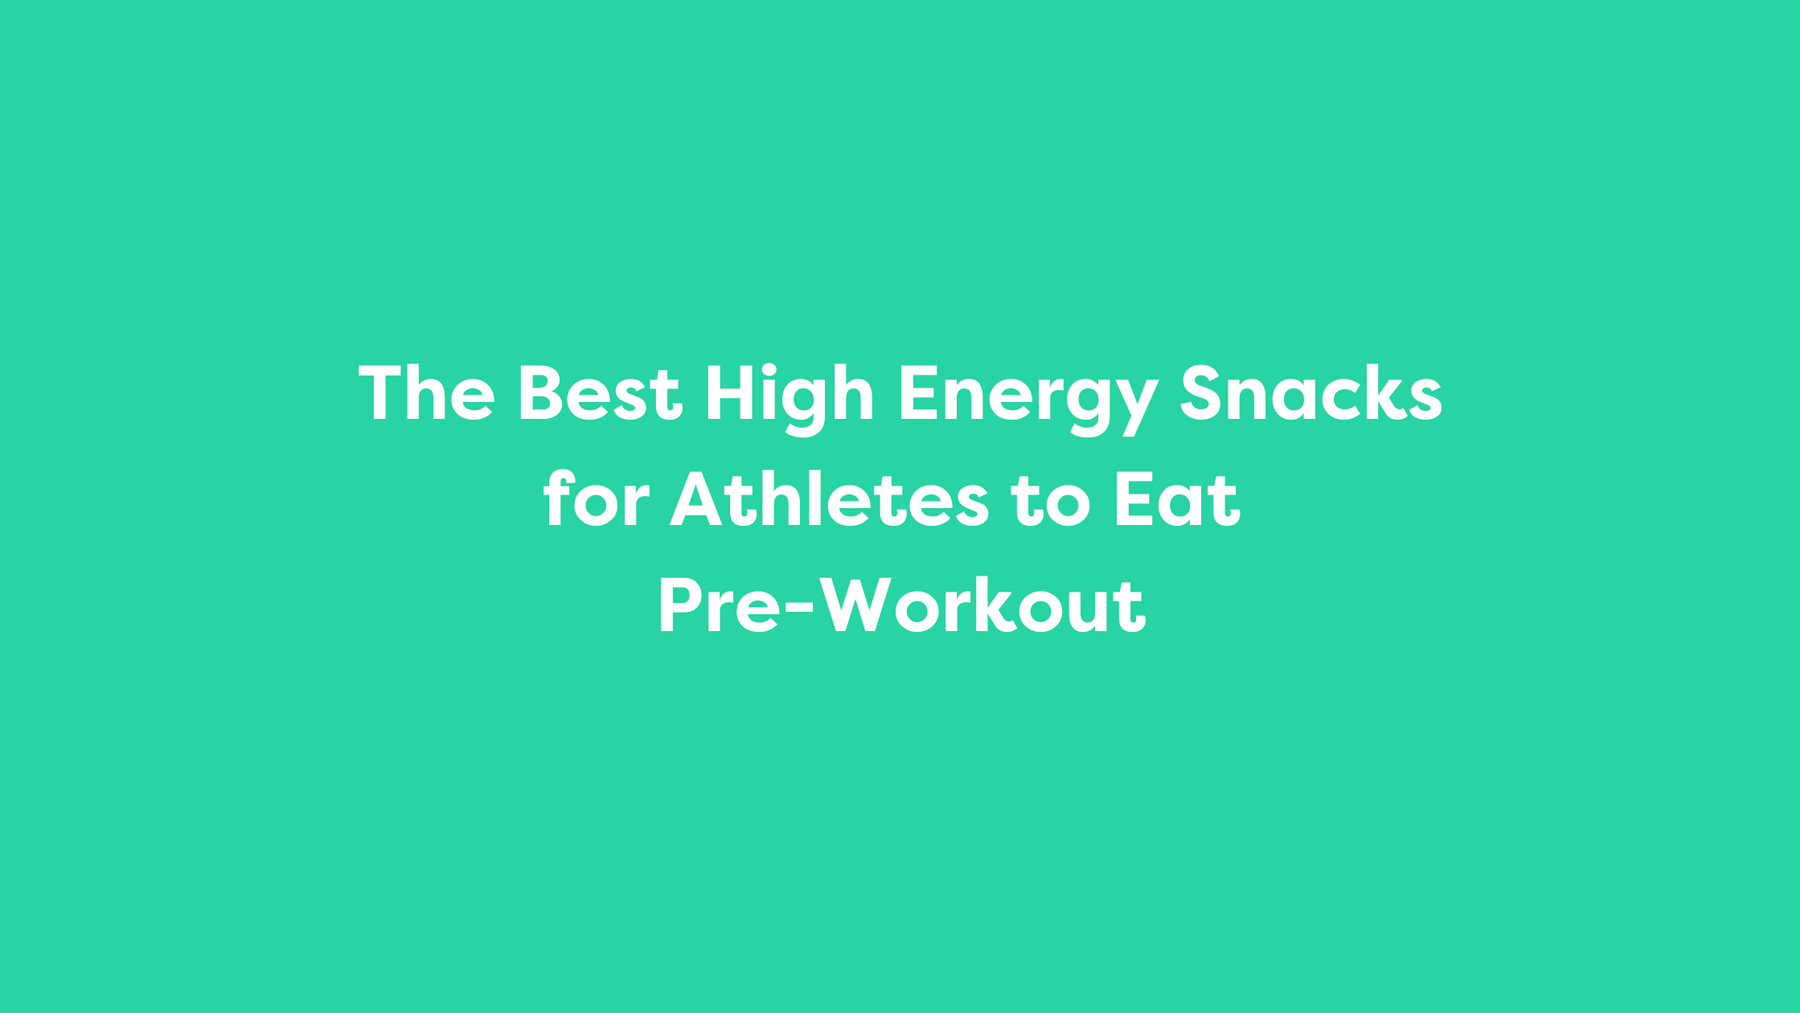 The Best High Energy Snacks for Athletes to Eat Pre-Workout